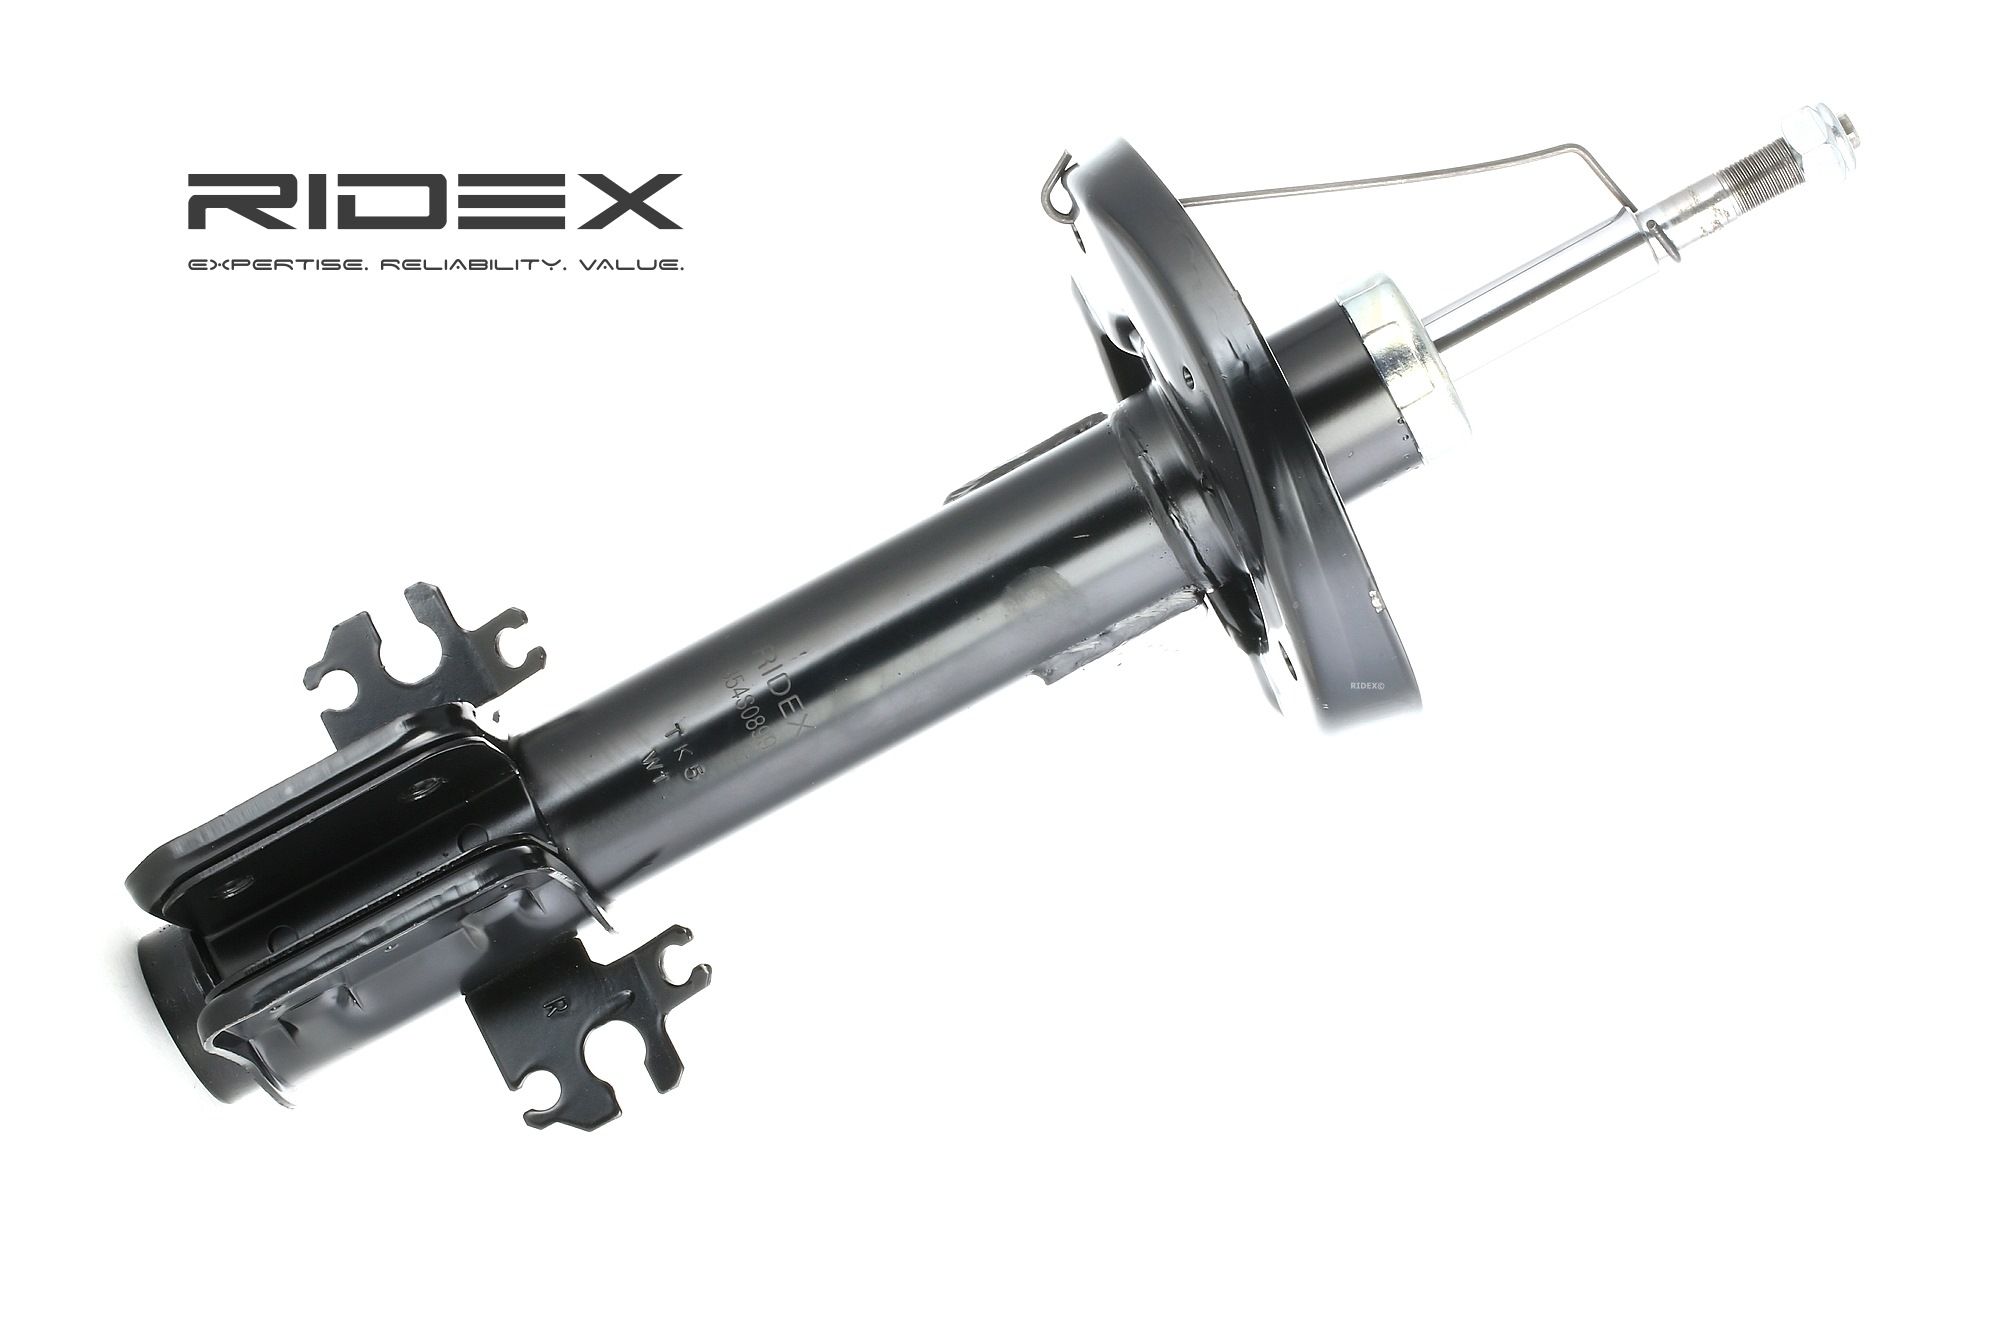 RIDEX 854S0899 Shock absorber Front Axle, Gas Pressure, 558x370 mm, Twin-Tube, Suspension Strut, Top pin, Bottom Clamp